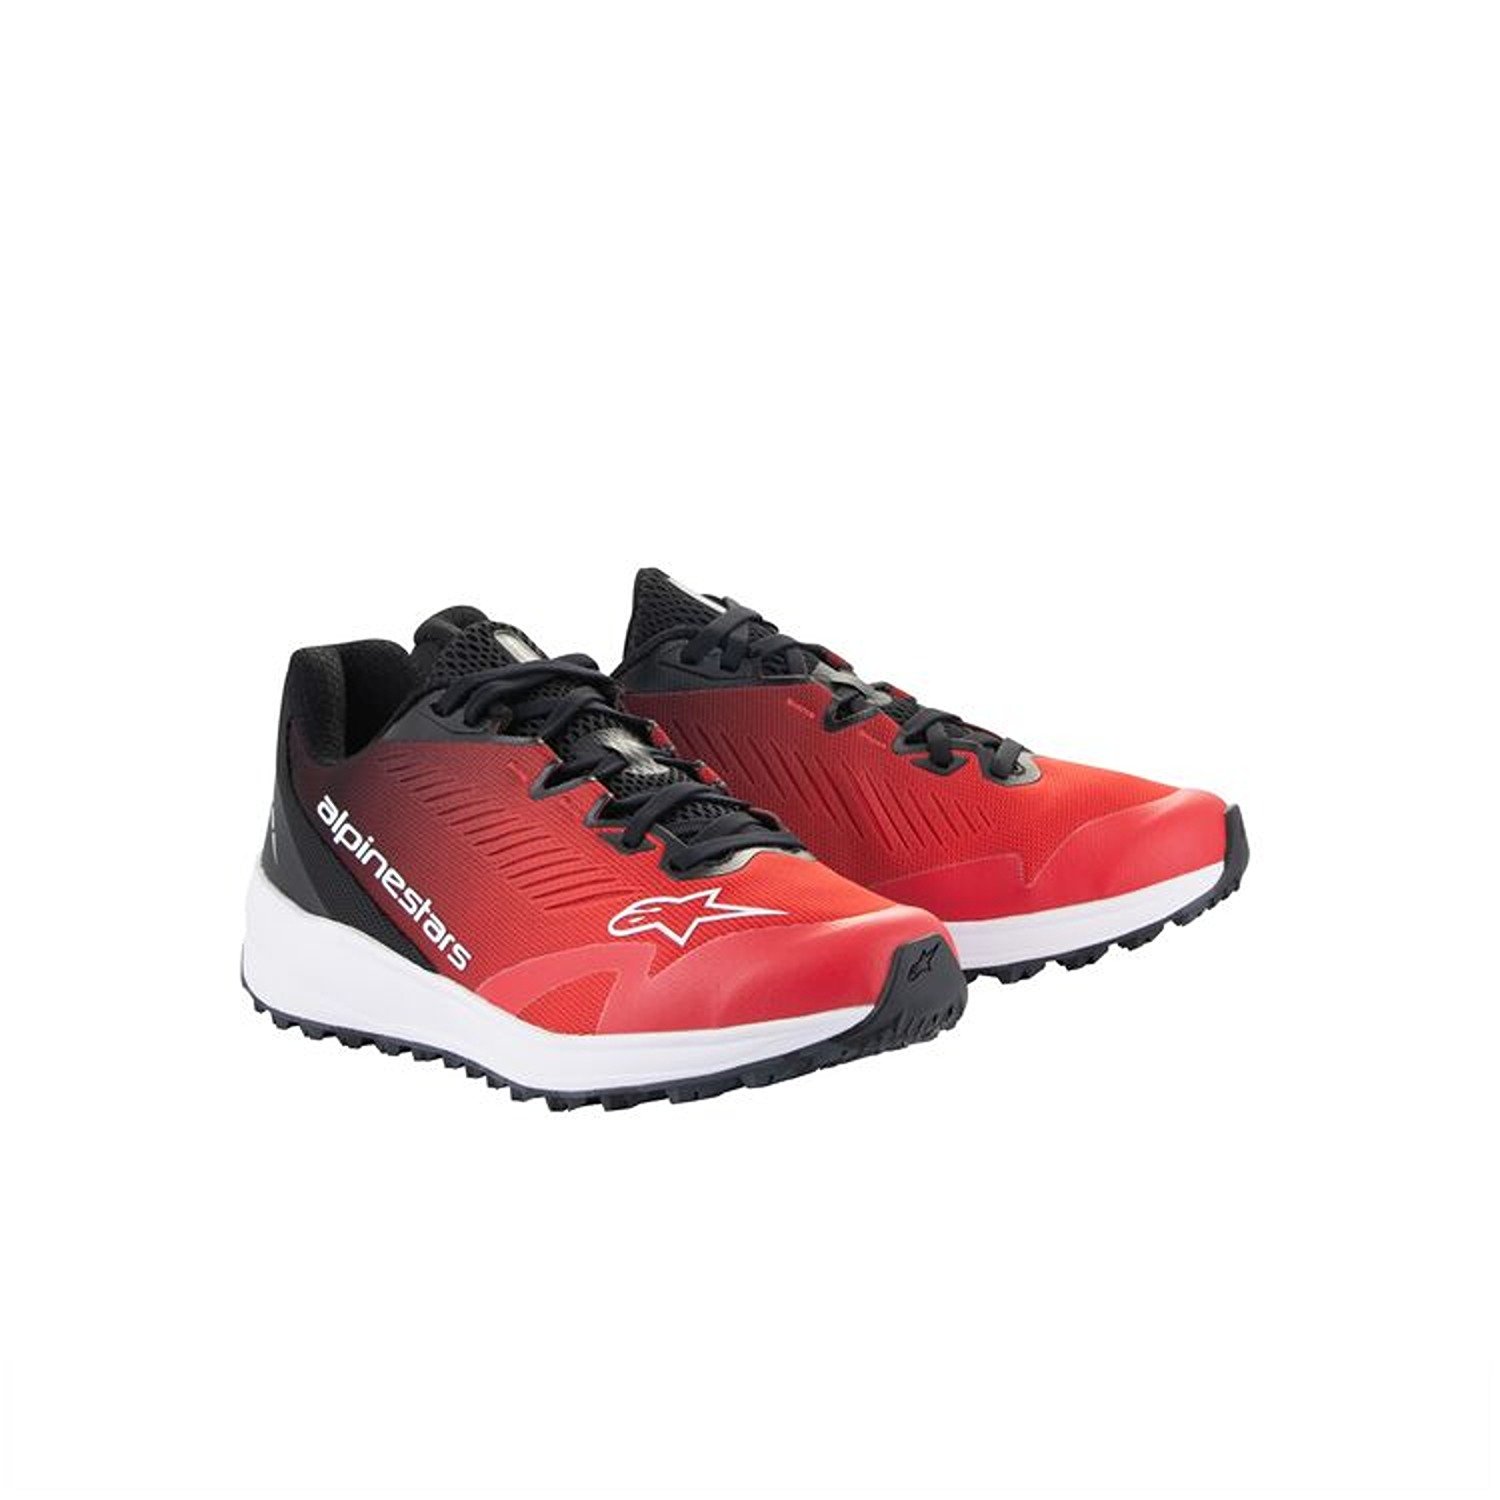 Image of Alpinestars Meta Road V2 Shoes Red Black White Taille US 115